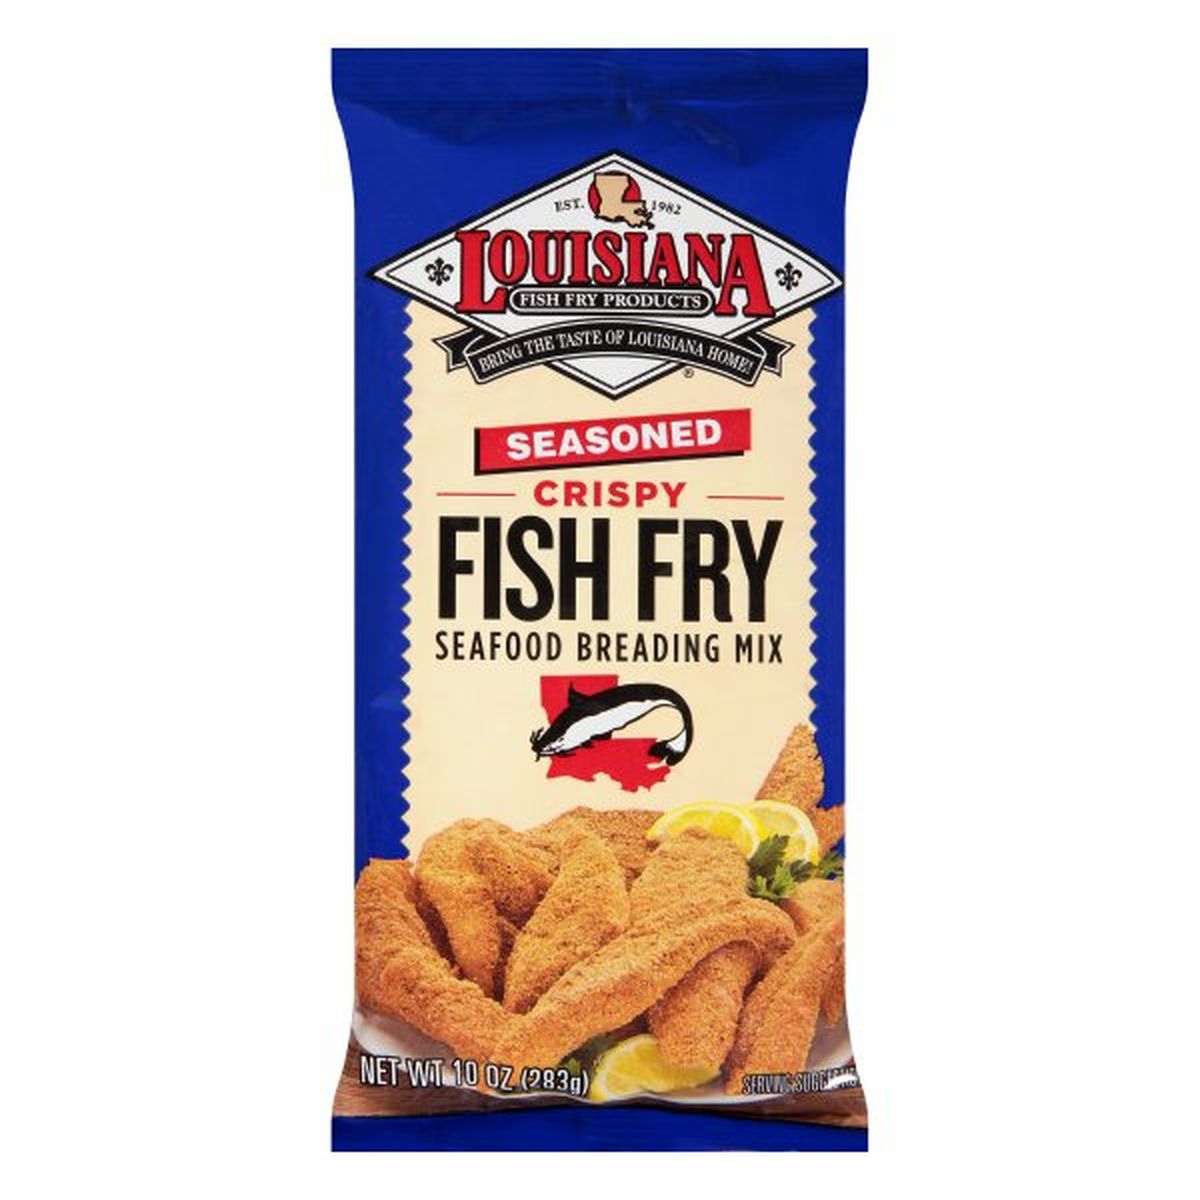 Calories in Louisiana Fish Fry Products Seafood Breading Mix, Fish Fry, Seasoned